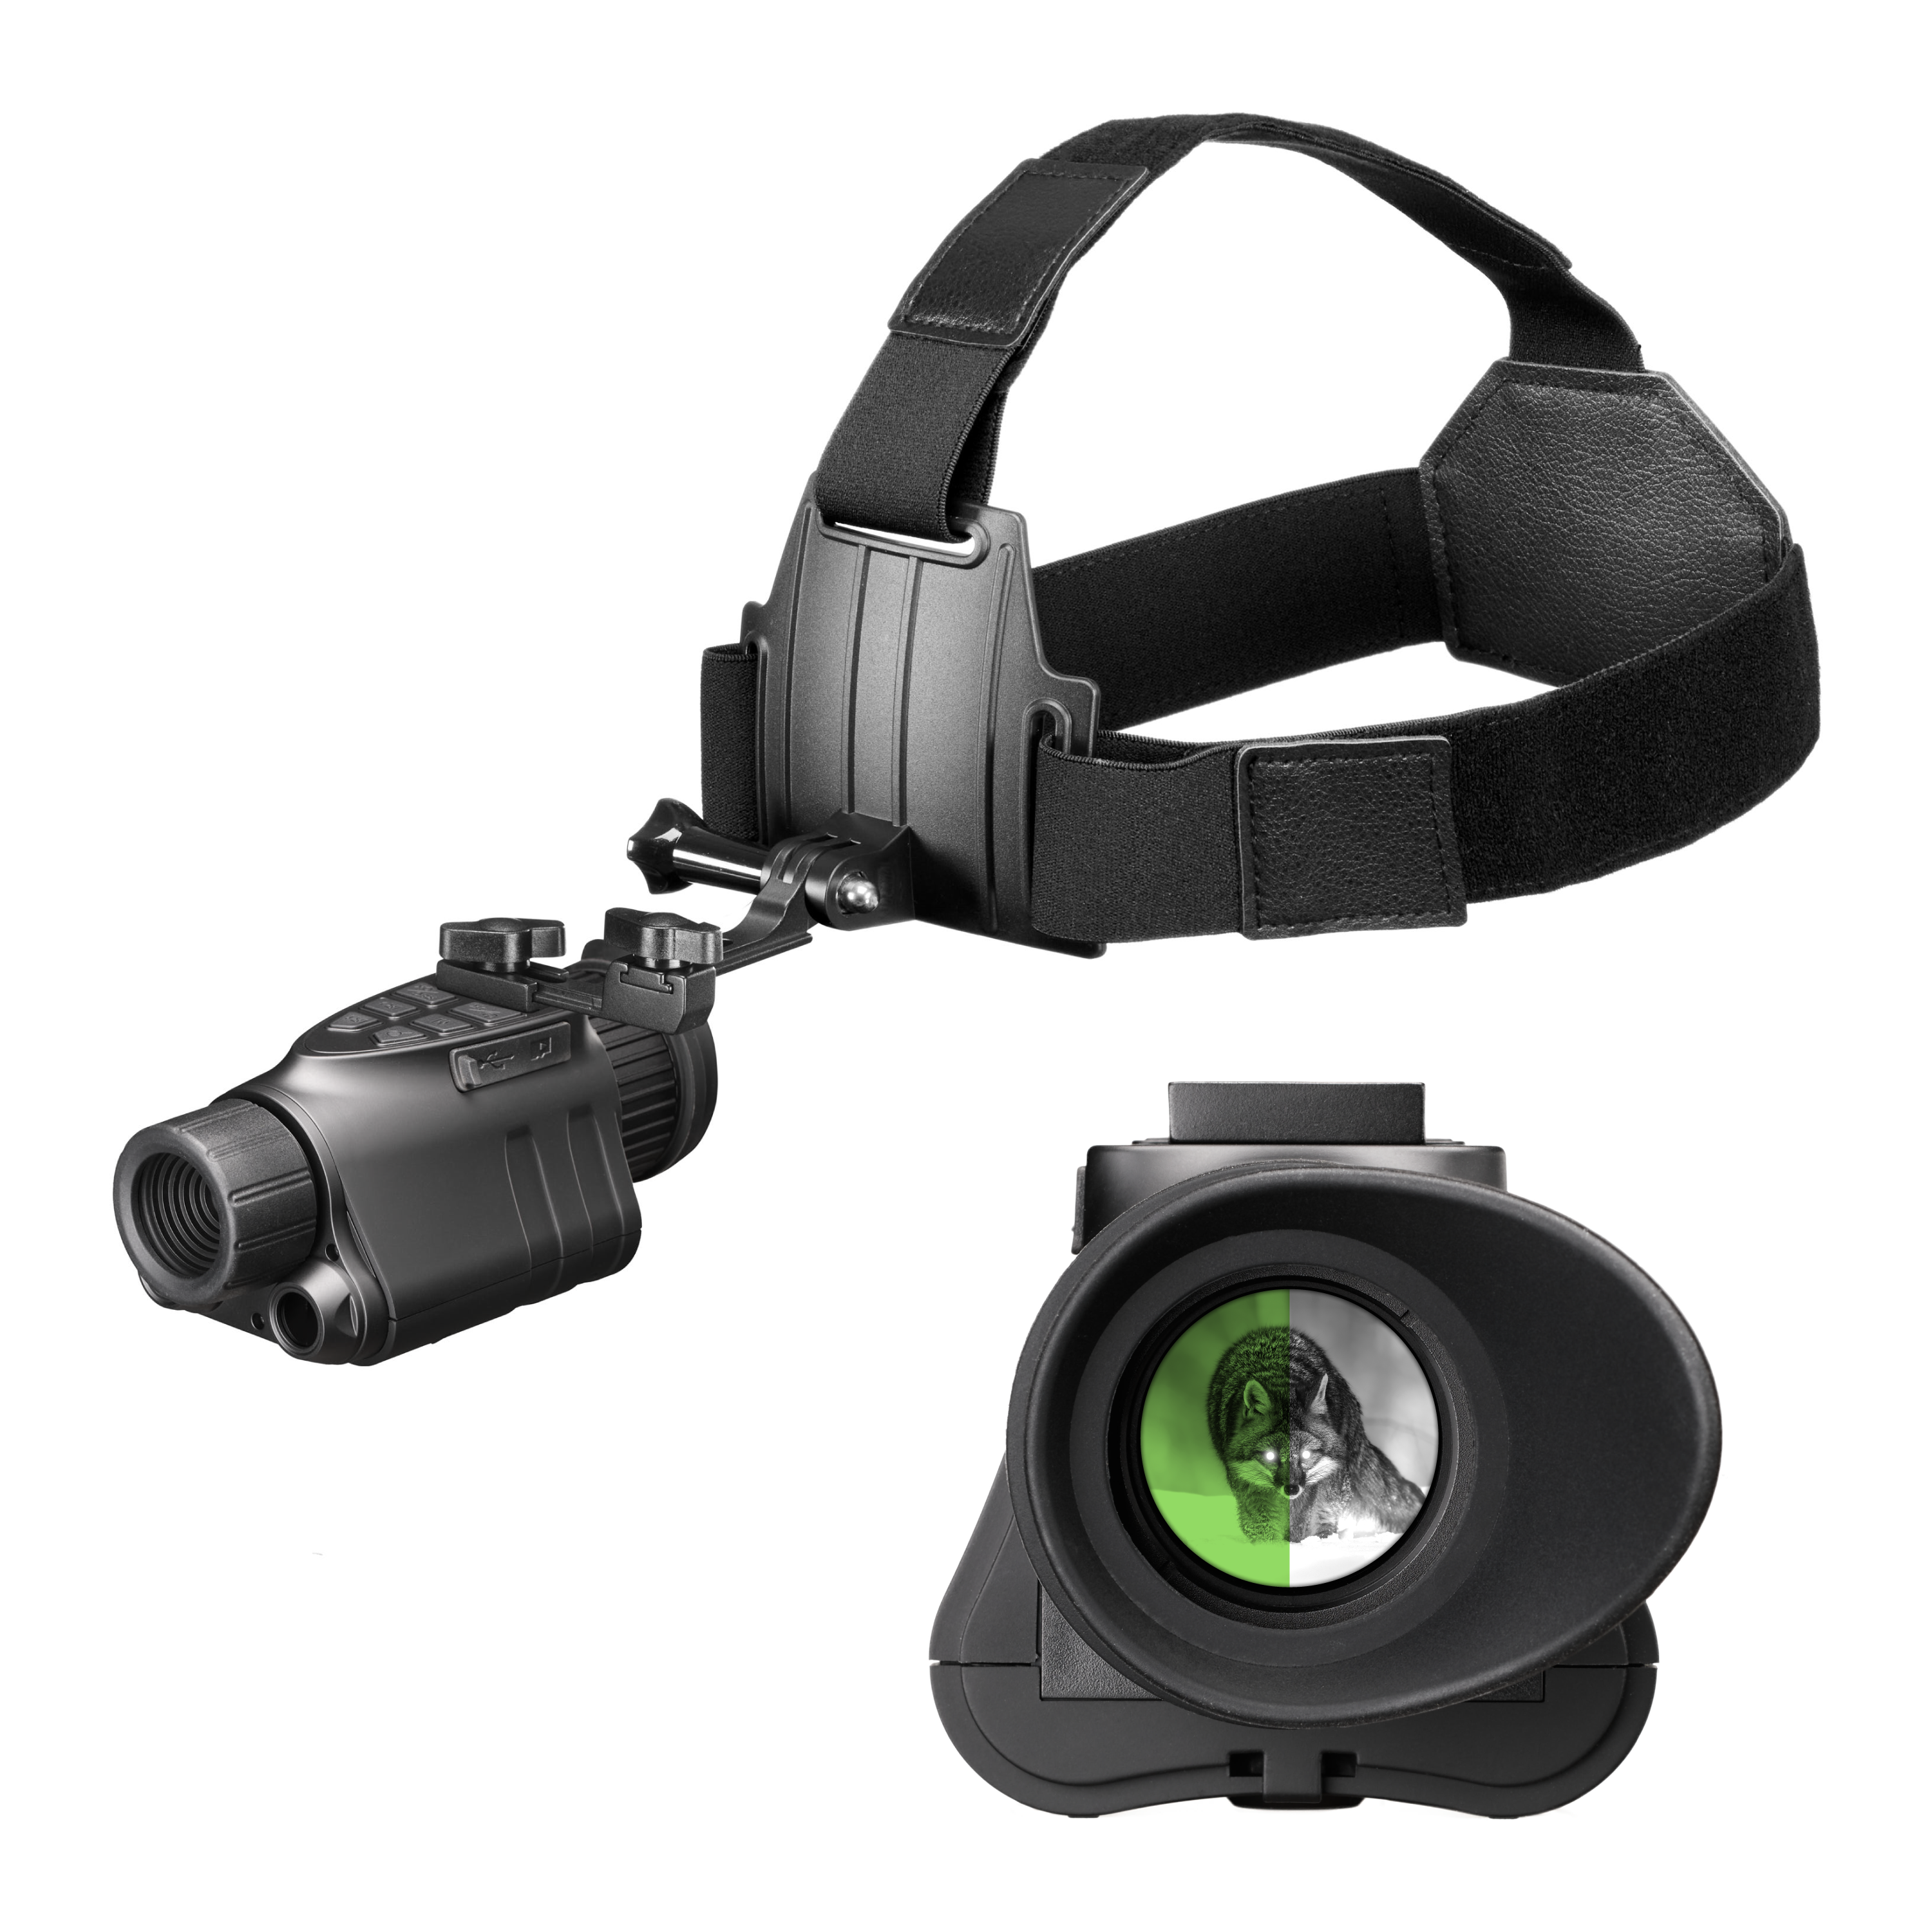 A picture of the Nightfox Prowl Monocular Night Vision Goggles